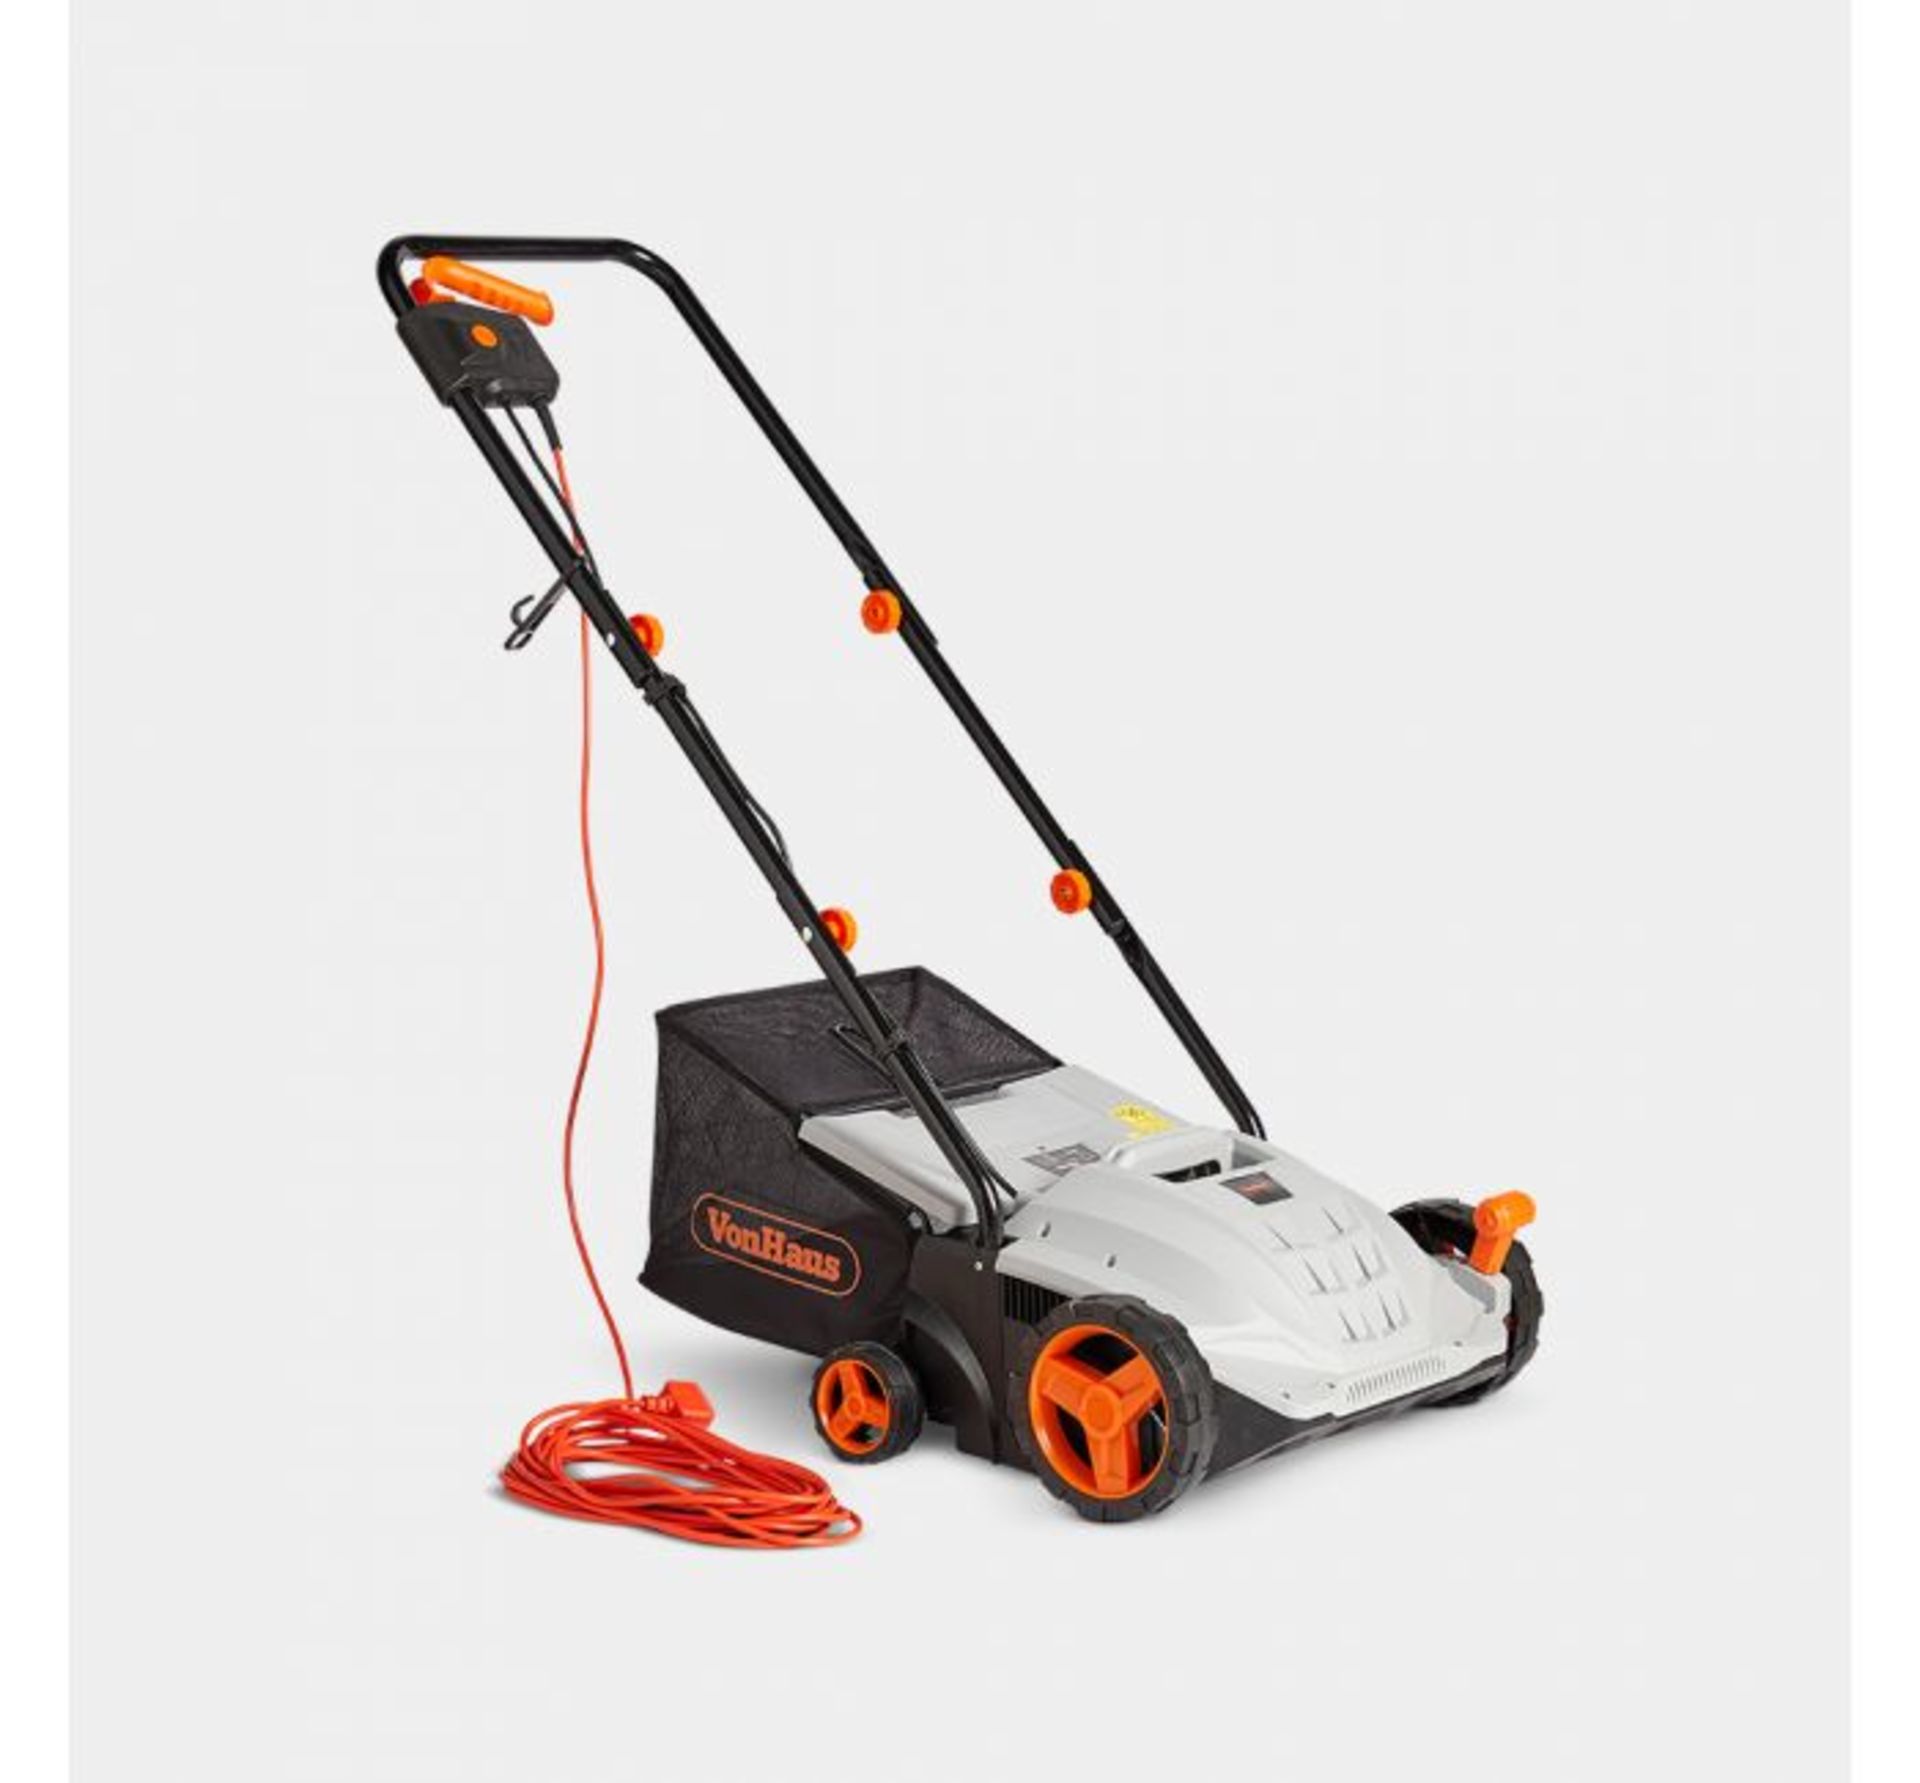 (LT12) 1500W Lawn Rake & Scarifier Remove thatch, moss, leaves and other debris from your lawn... - Image 2 of 3